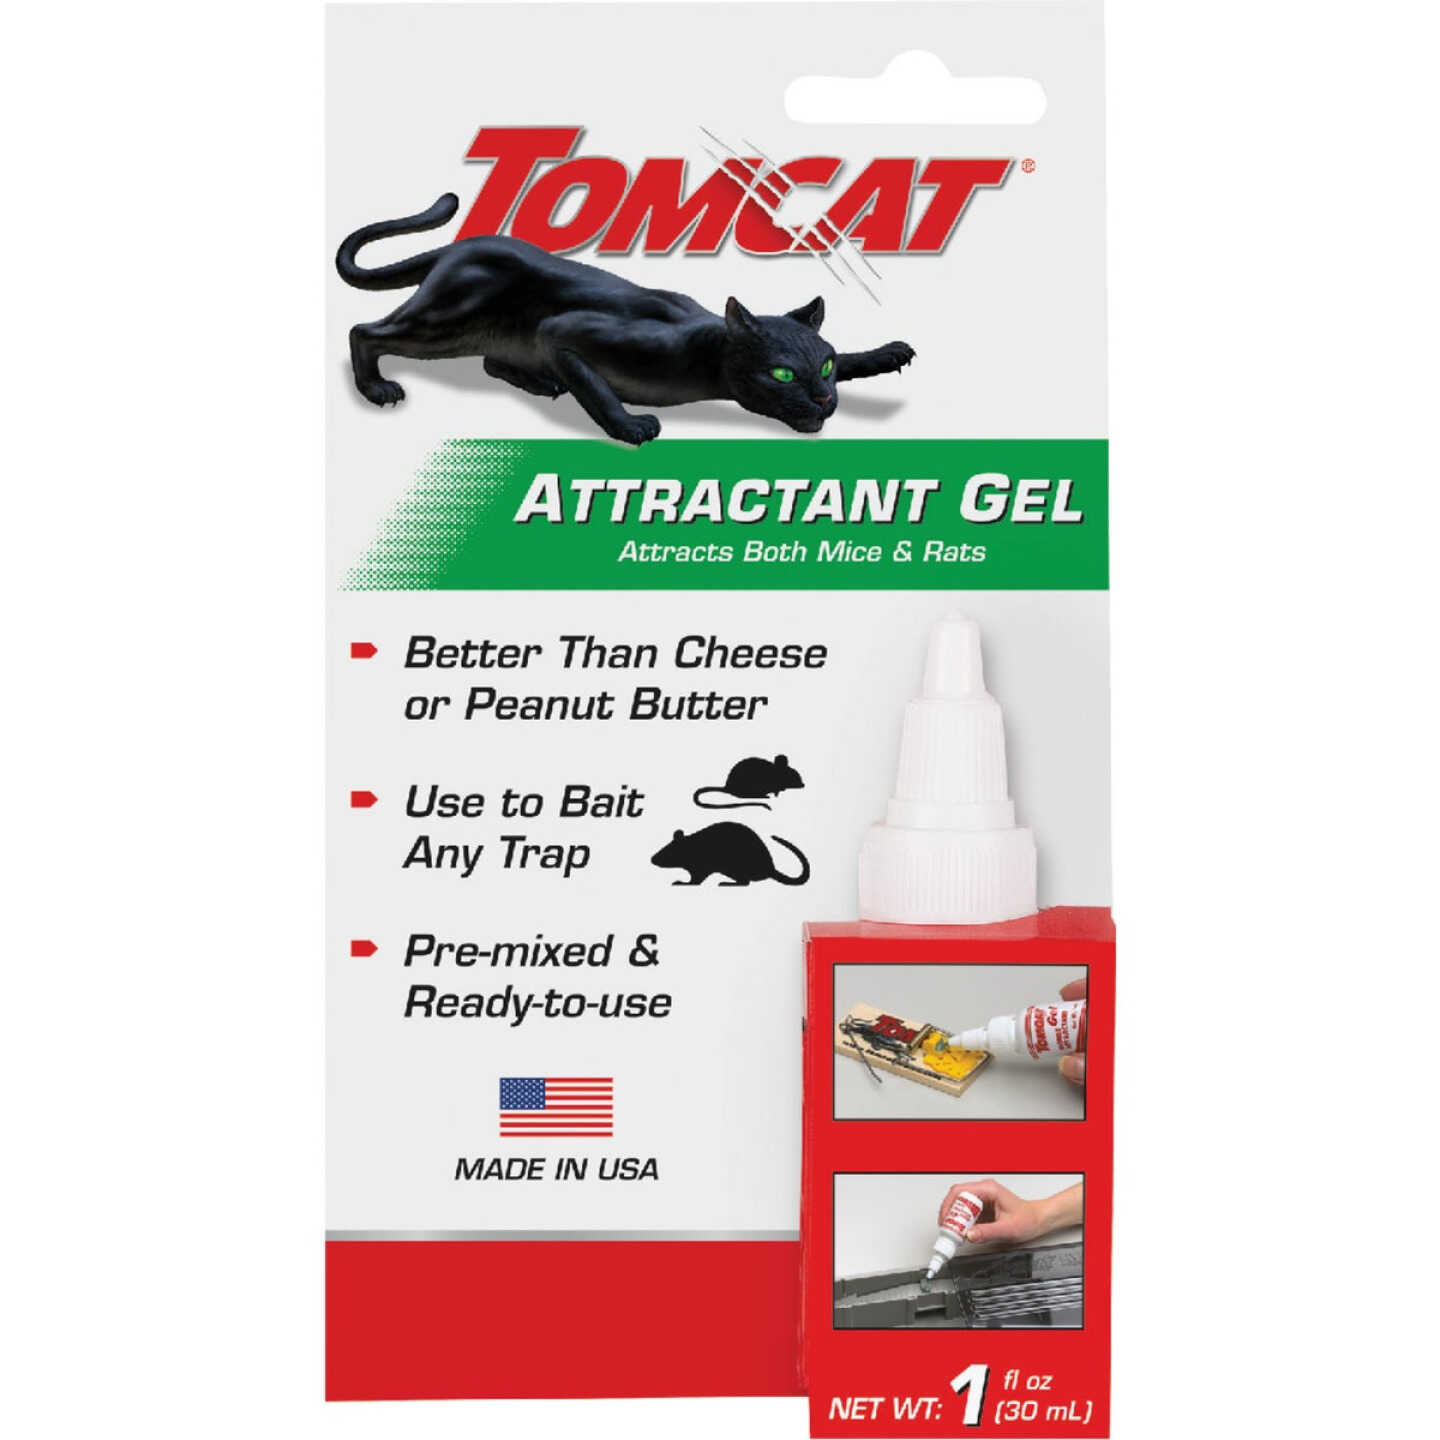 Tomcat Heavy Duty Mouse Trap 2 Pack